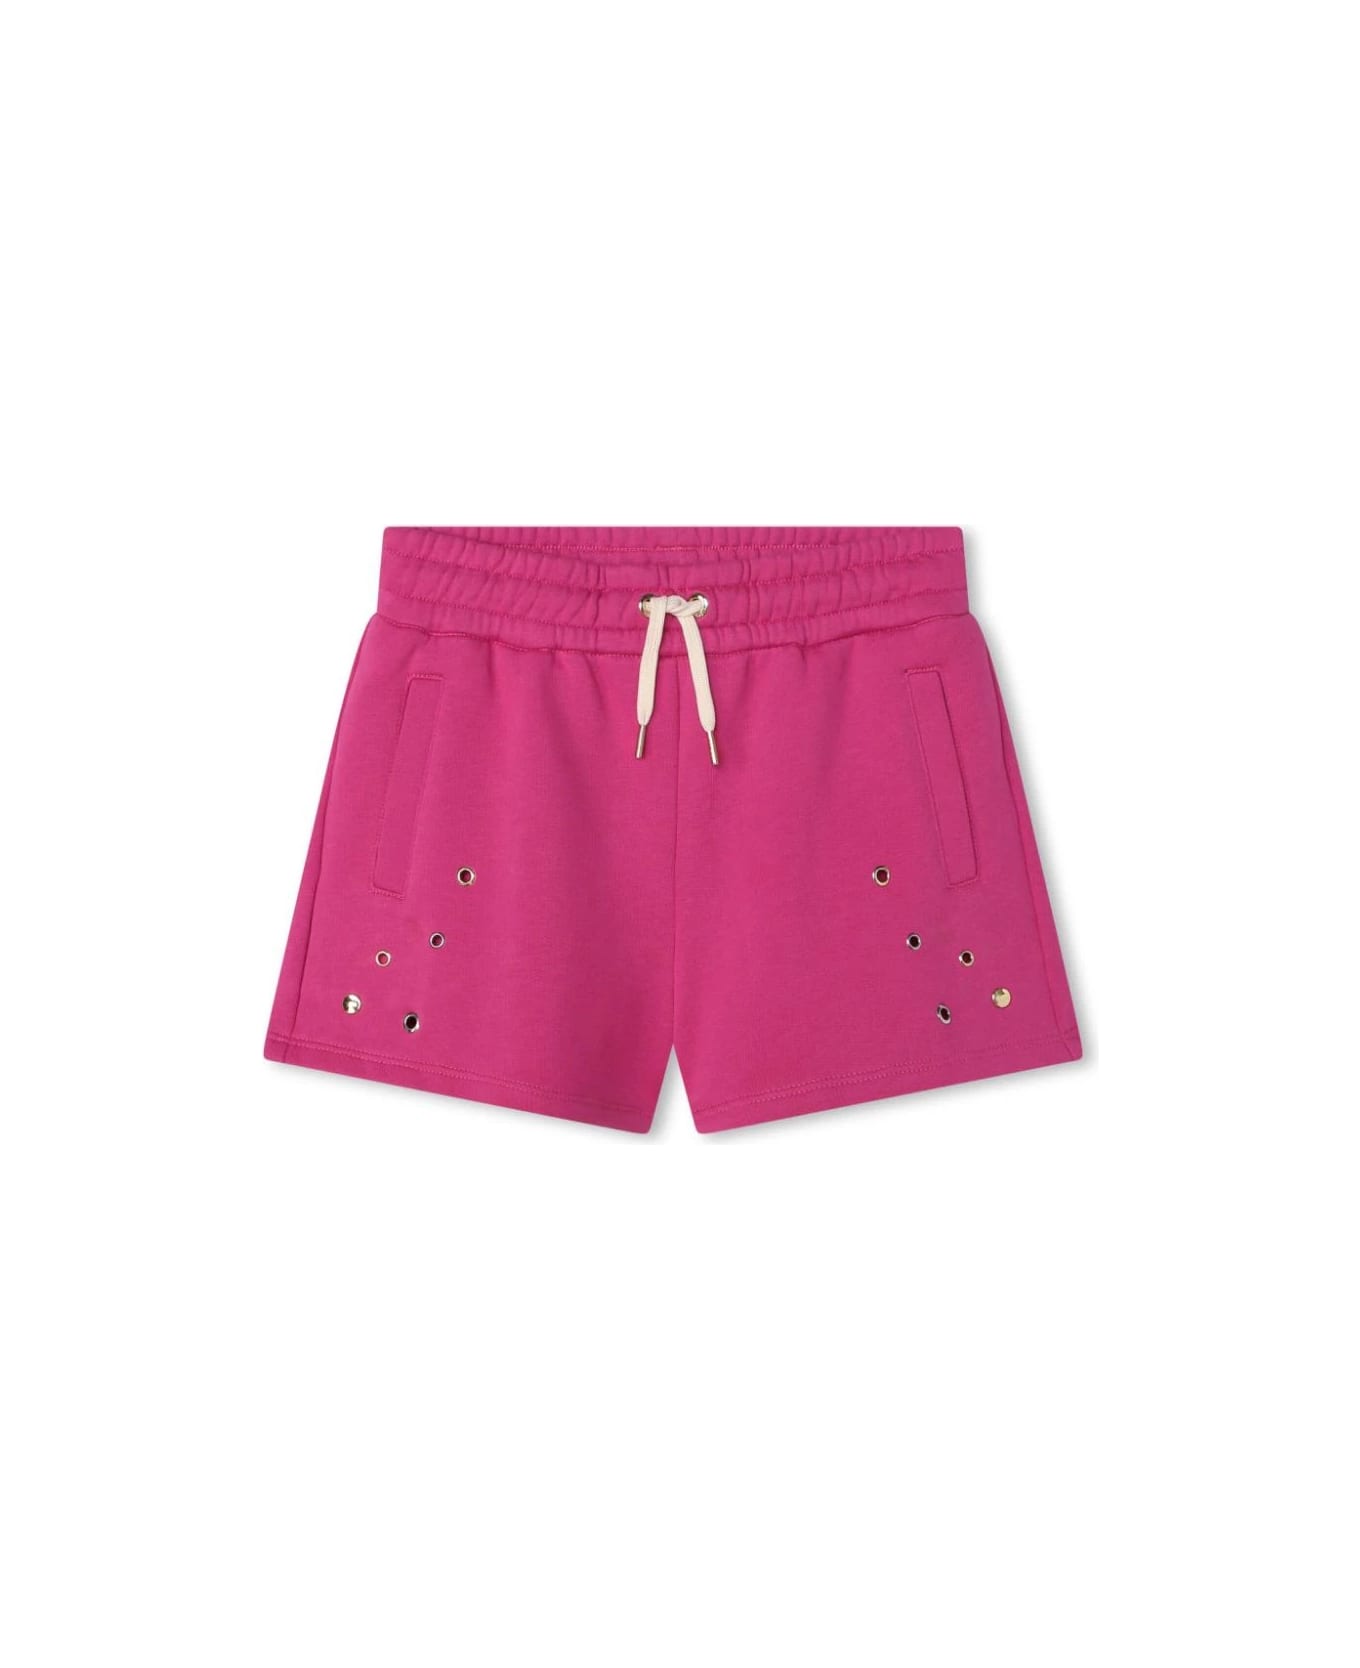 Chloé Fuchsia Sporty Shorts With Studs - Pink ボトムス